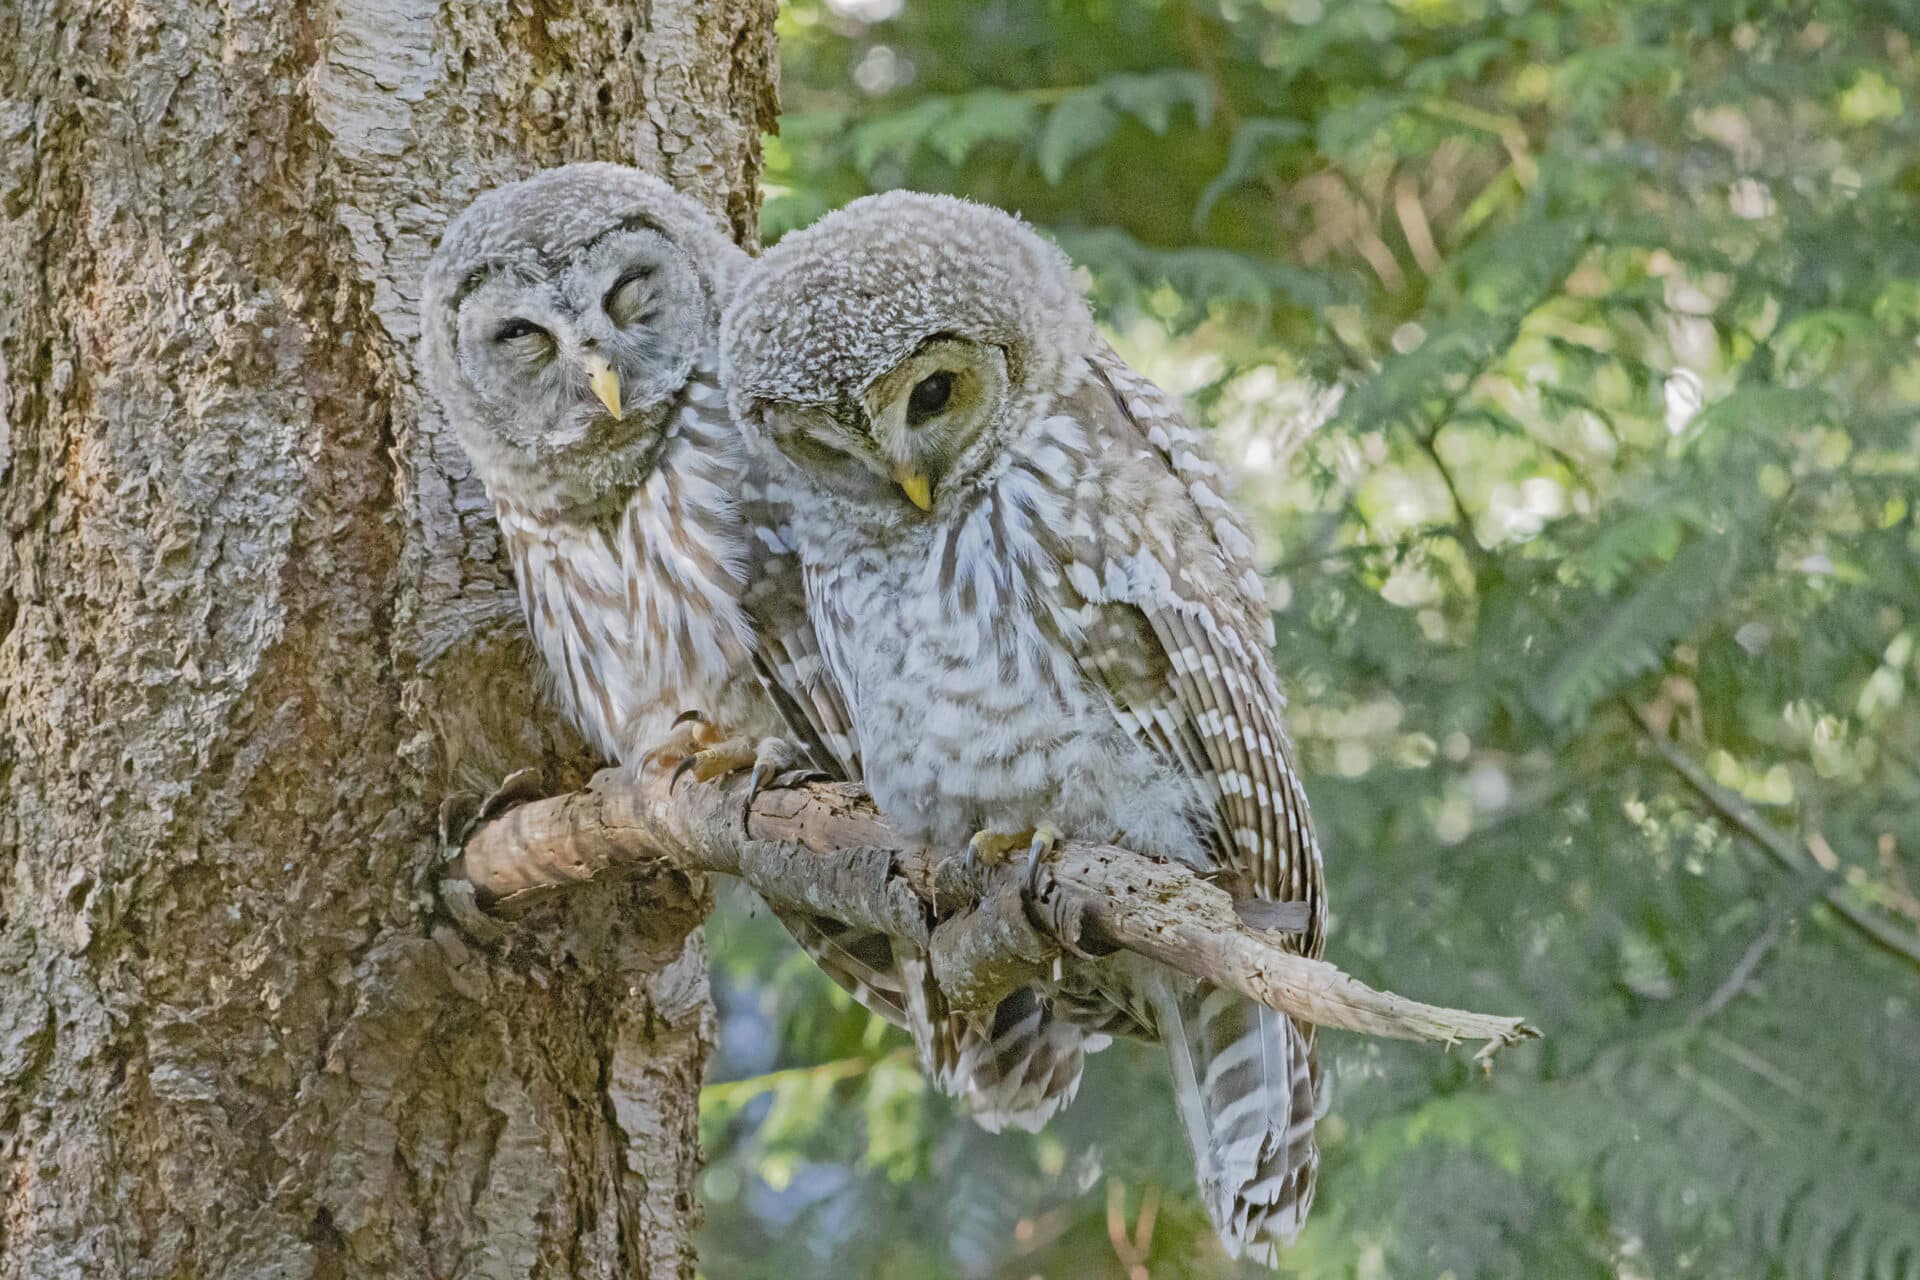 Barred Owlets, July 15, 2021